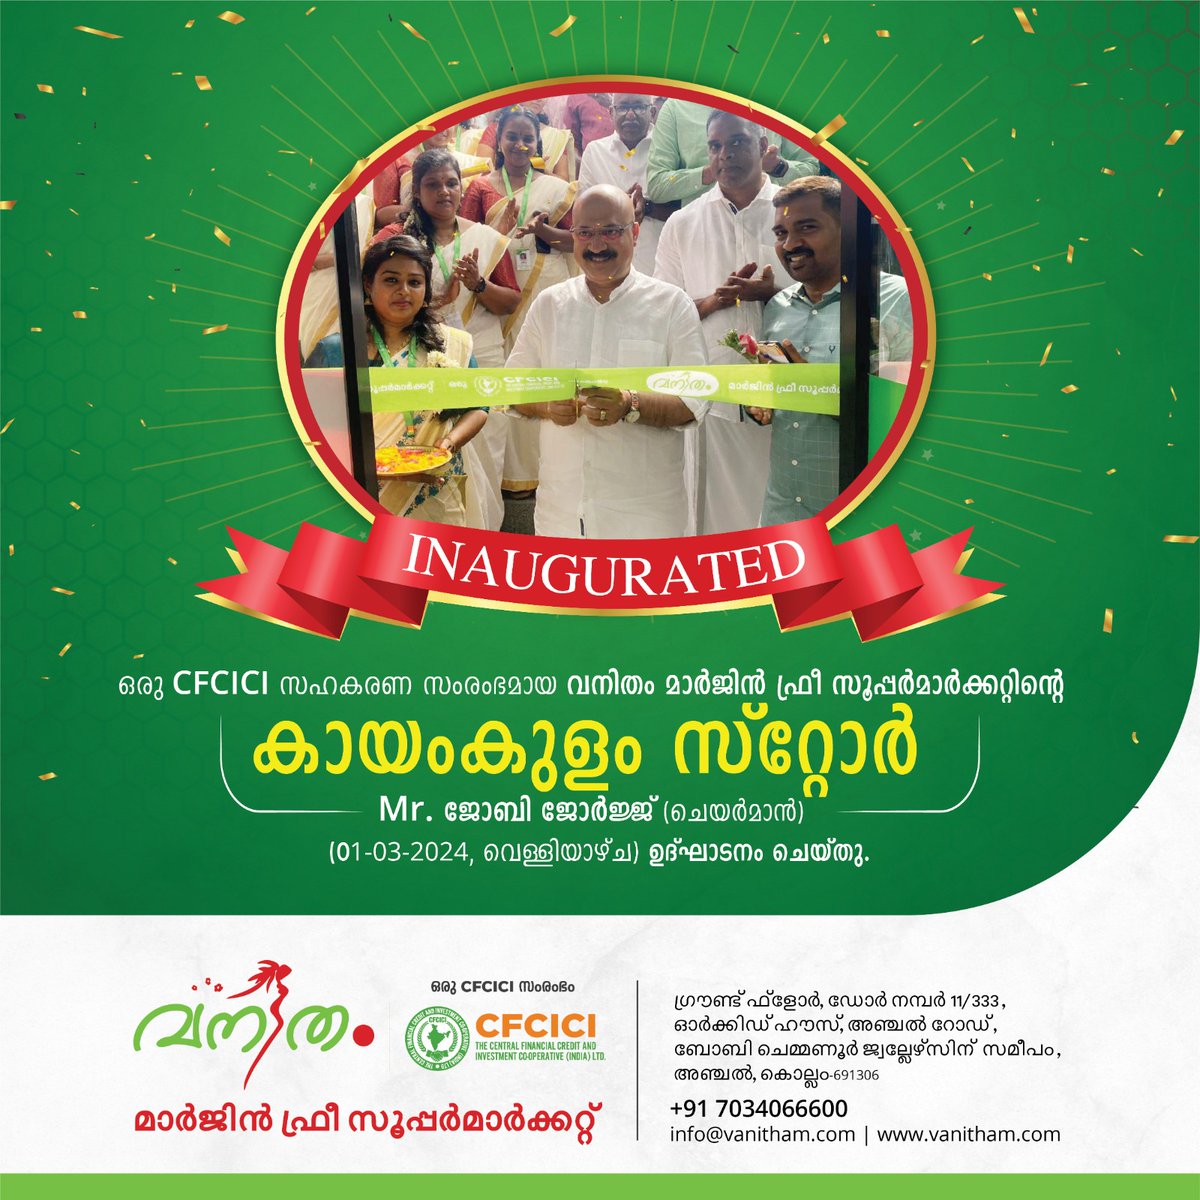 Discover convenience and savings at Vanitham Supermarket in Kayamkulam! Led by Chairman Mr. Joby George, your ultimate shopping destination!' 🛍️🌟

Don't miss—come visit us today! #VanithamSupermarket #GrandOpening #kayamkulam